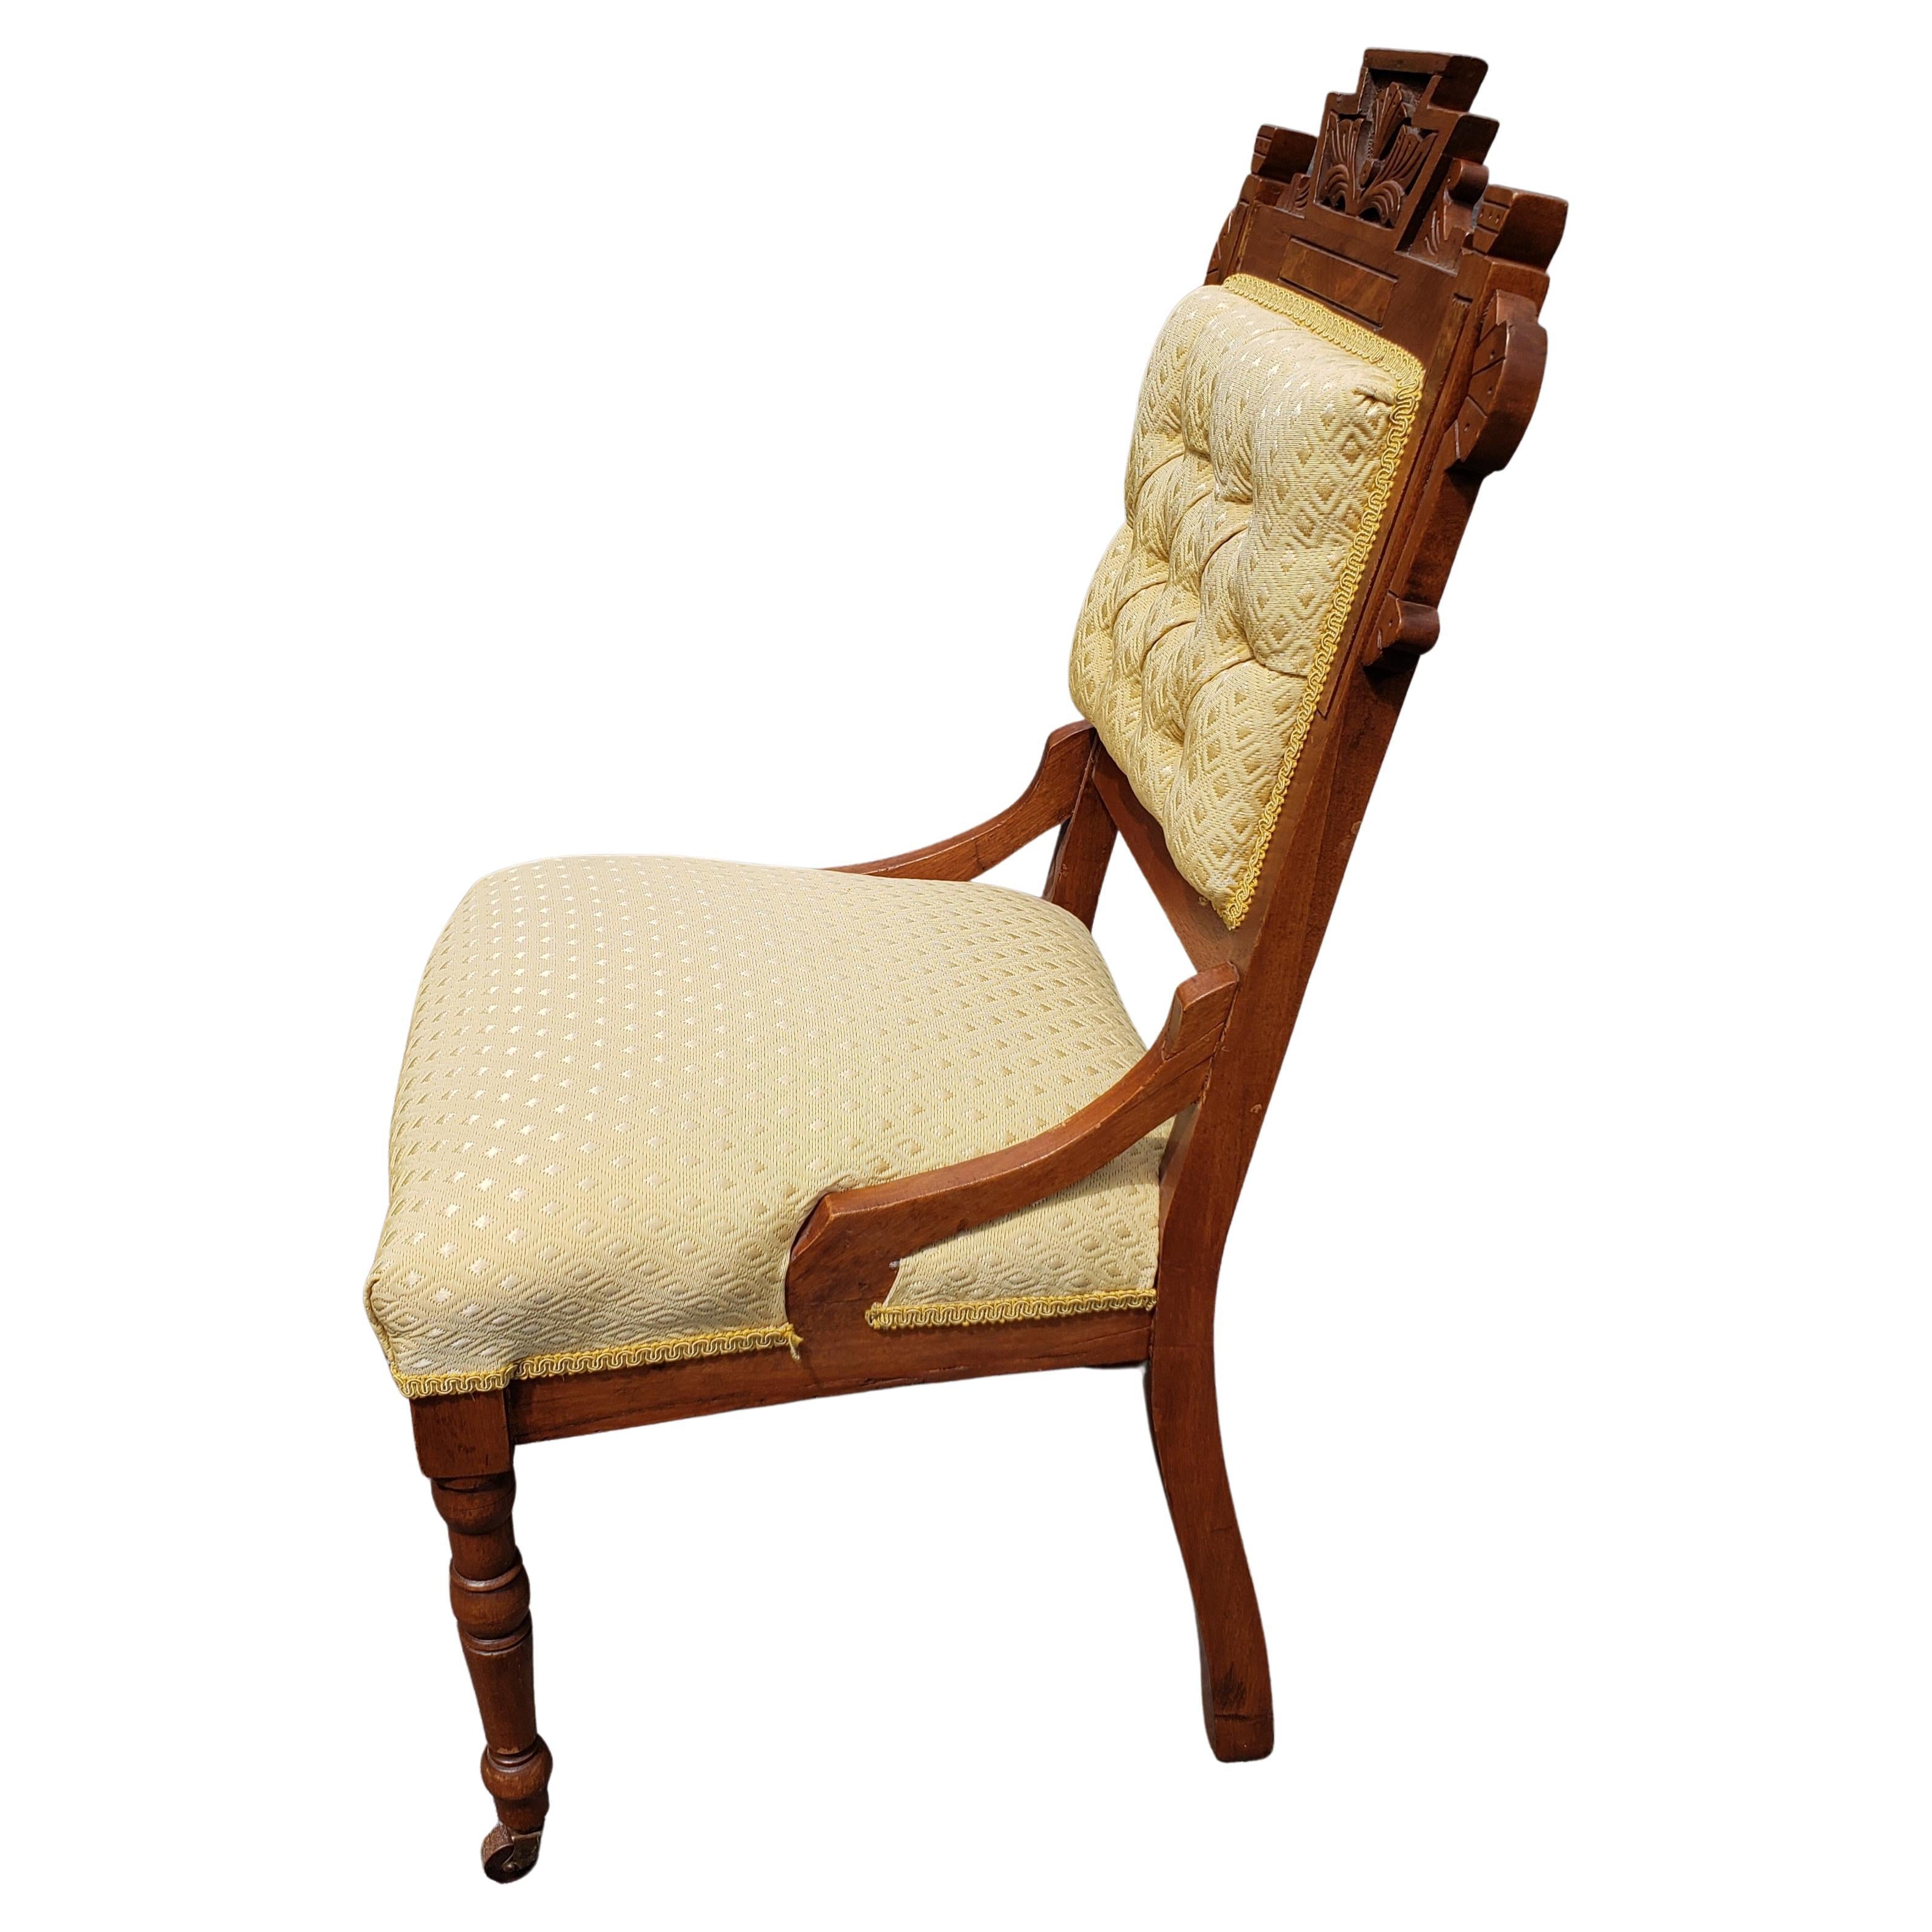 American Antique Victorian Walnut Upholstered Tufted Parlor Chair, Circa 1880s For Sale